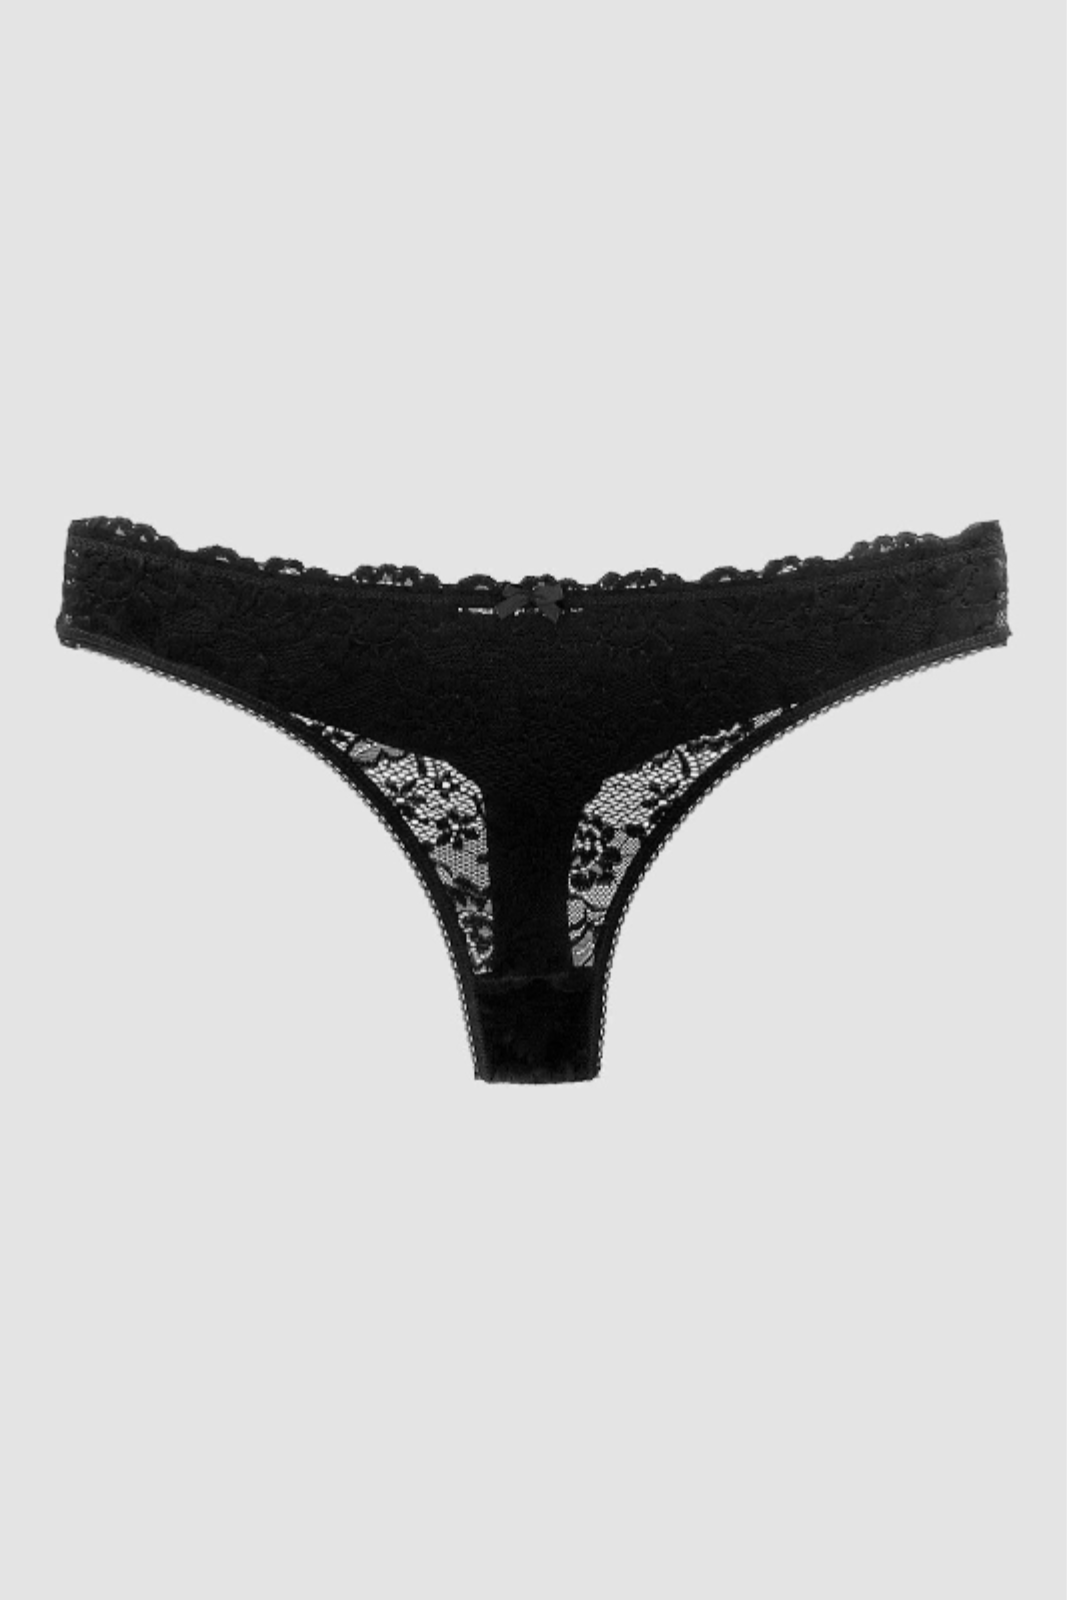 [Leanid Pavel] Lace Thong